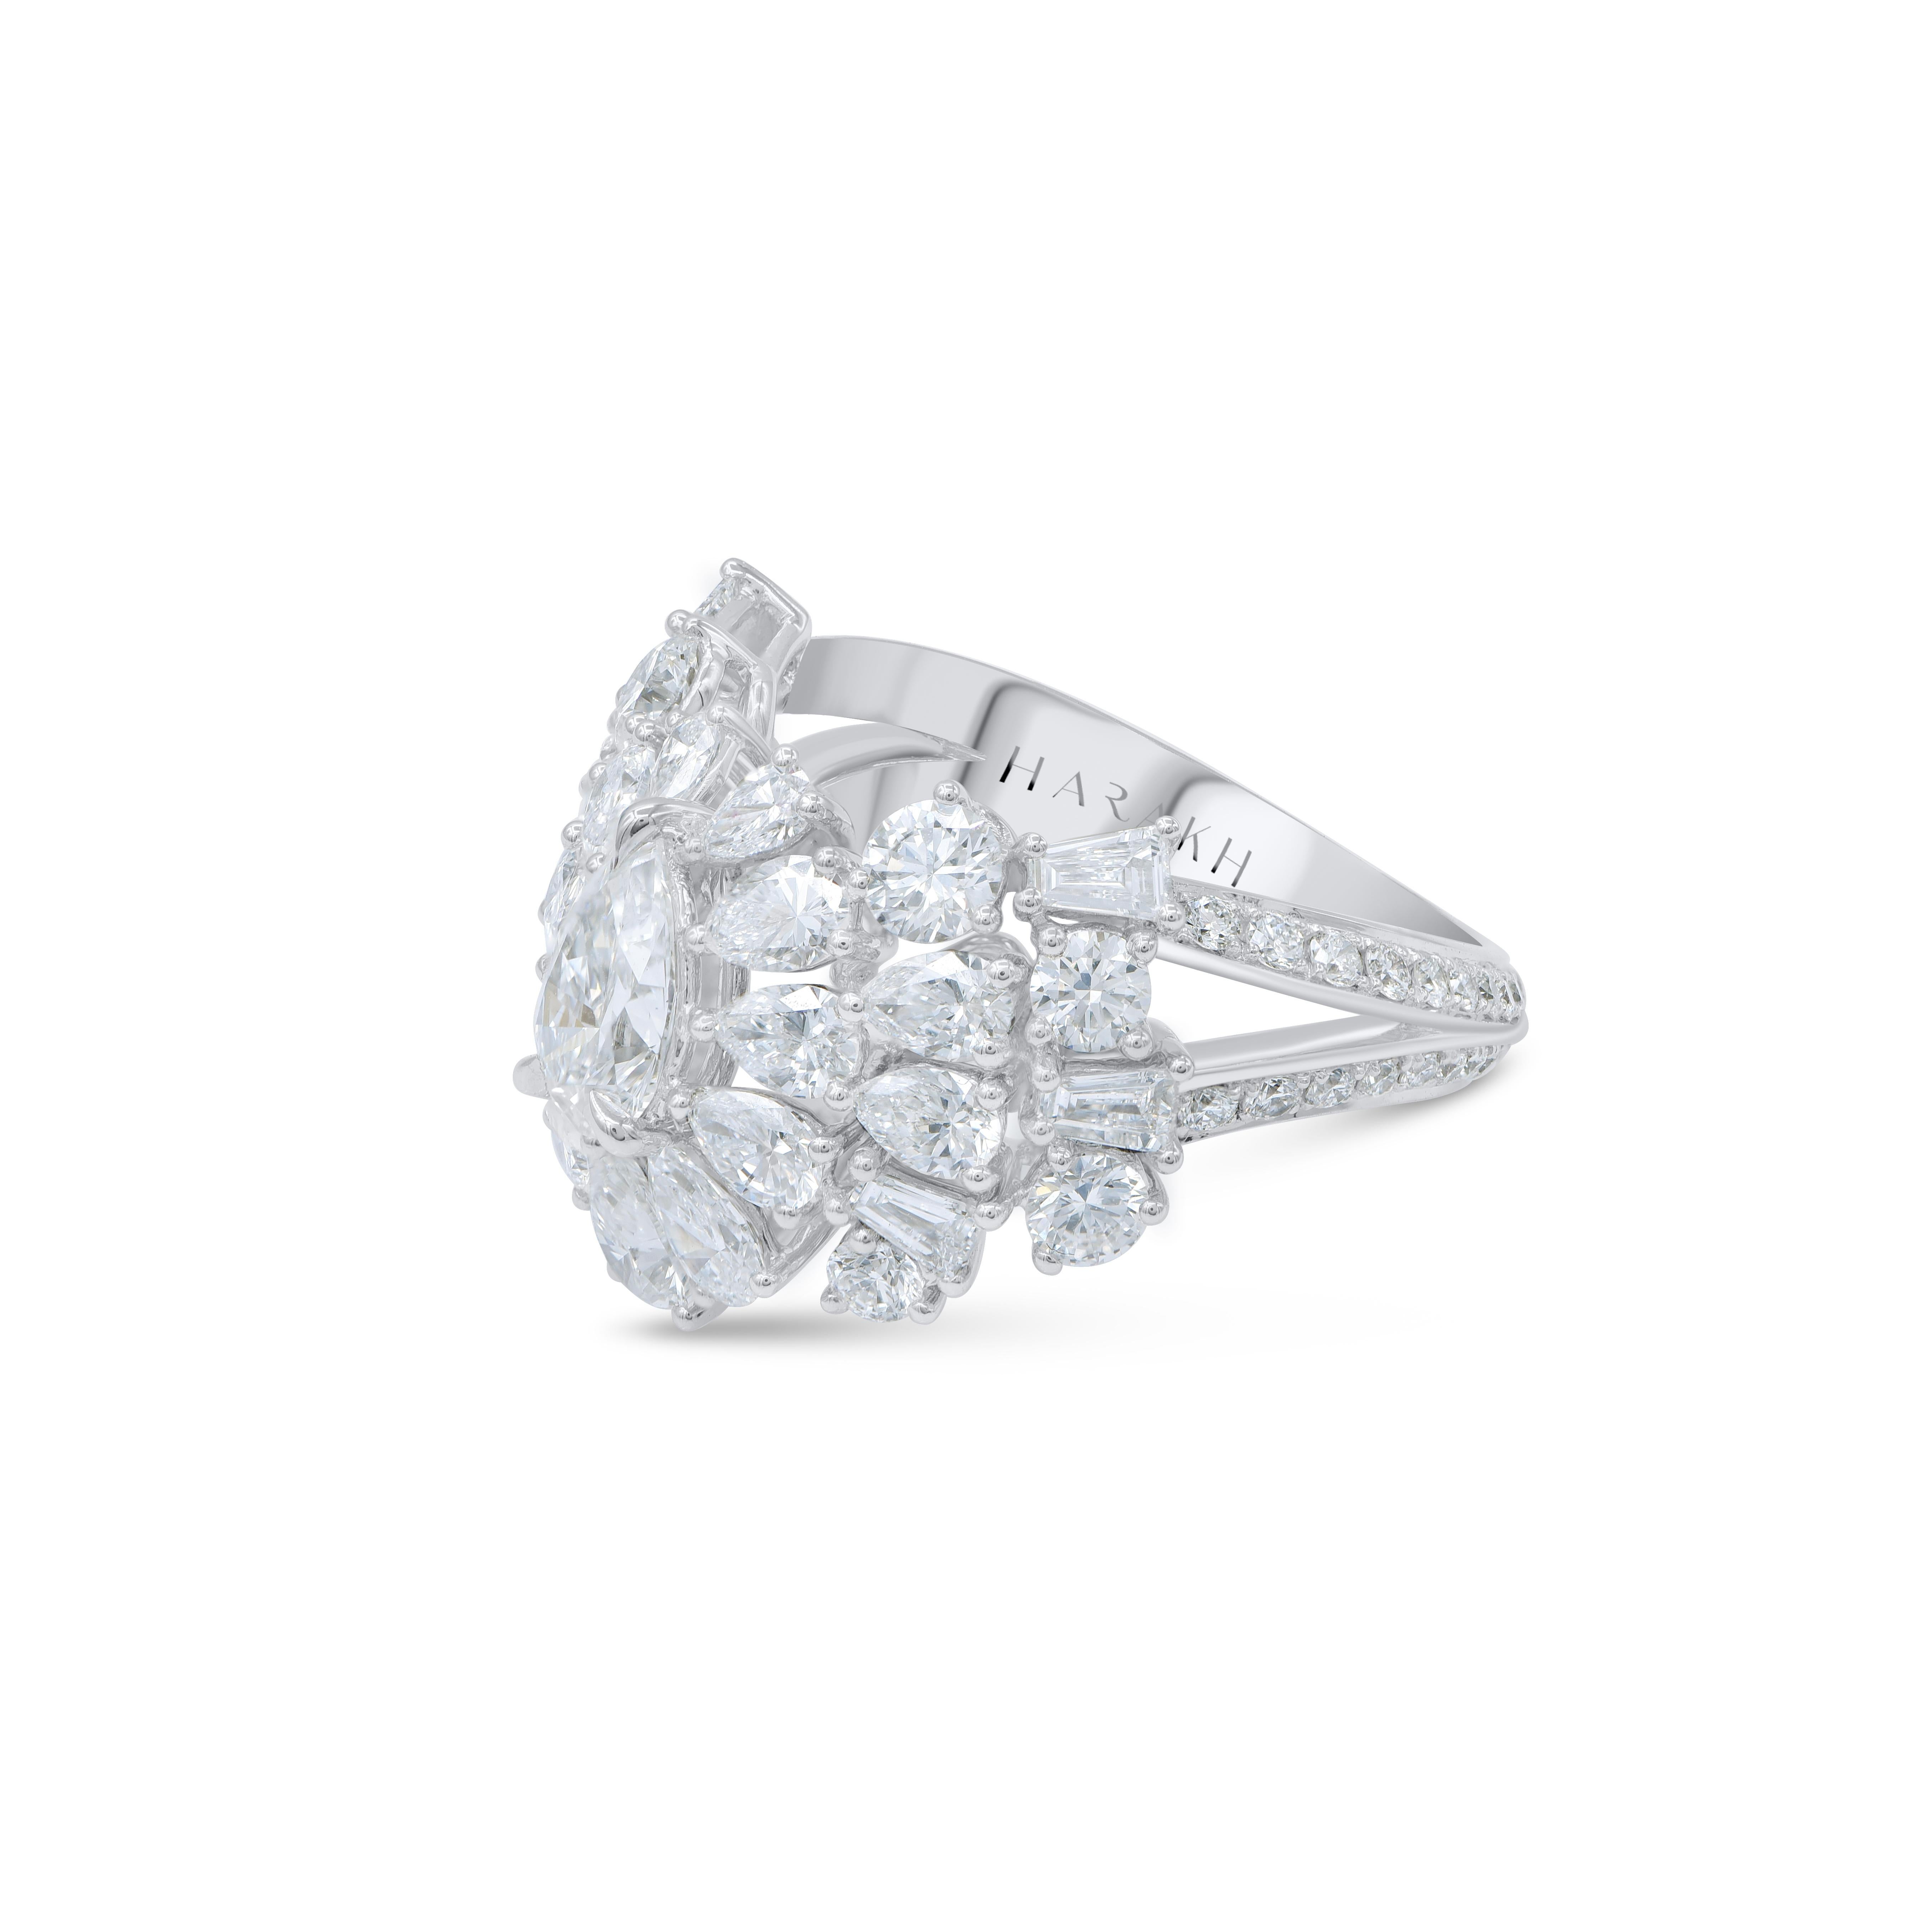 This bridal diamond ring has a GIA certified 0.73 carat pear shaped center stone surrounded beautifully with 56 brilliant round diamonds, 6 baguettes, 16 pear shape diamonds including center stone. Handcrafted in 18 kt white gold, the total diamond